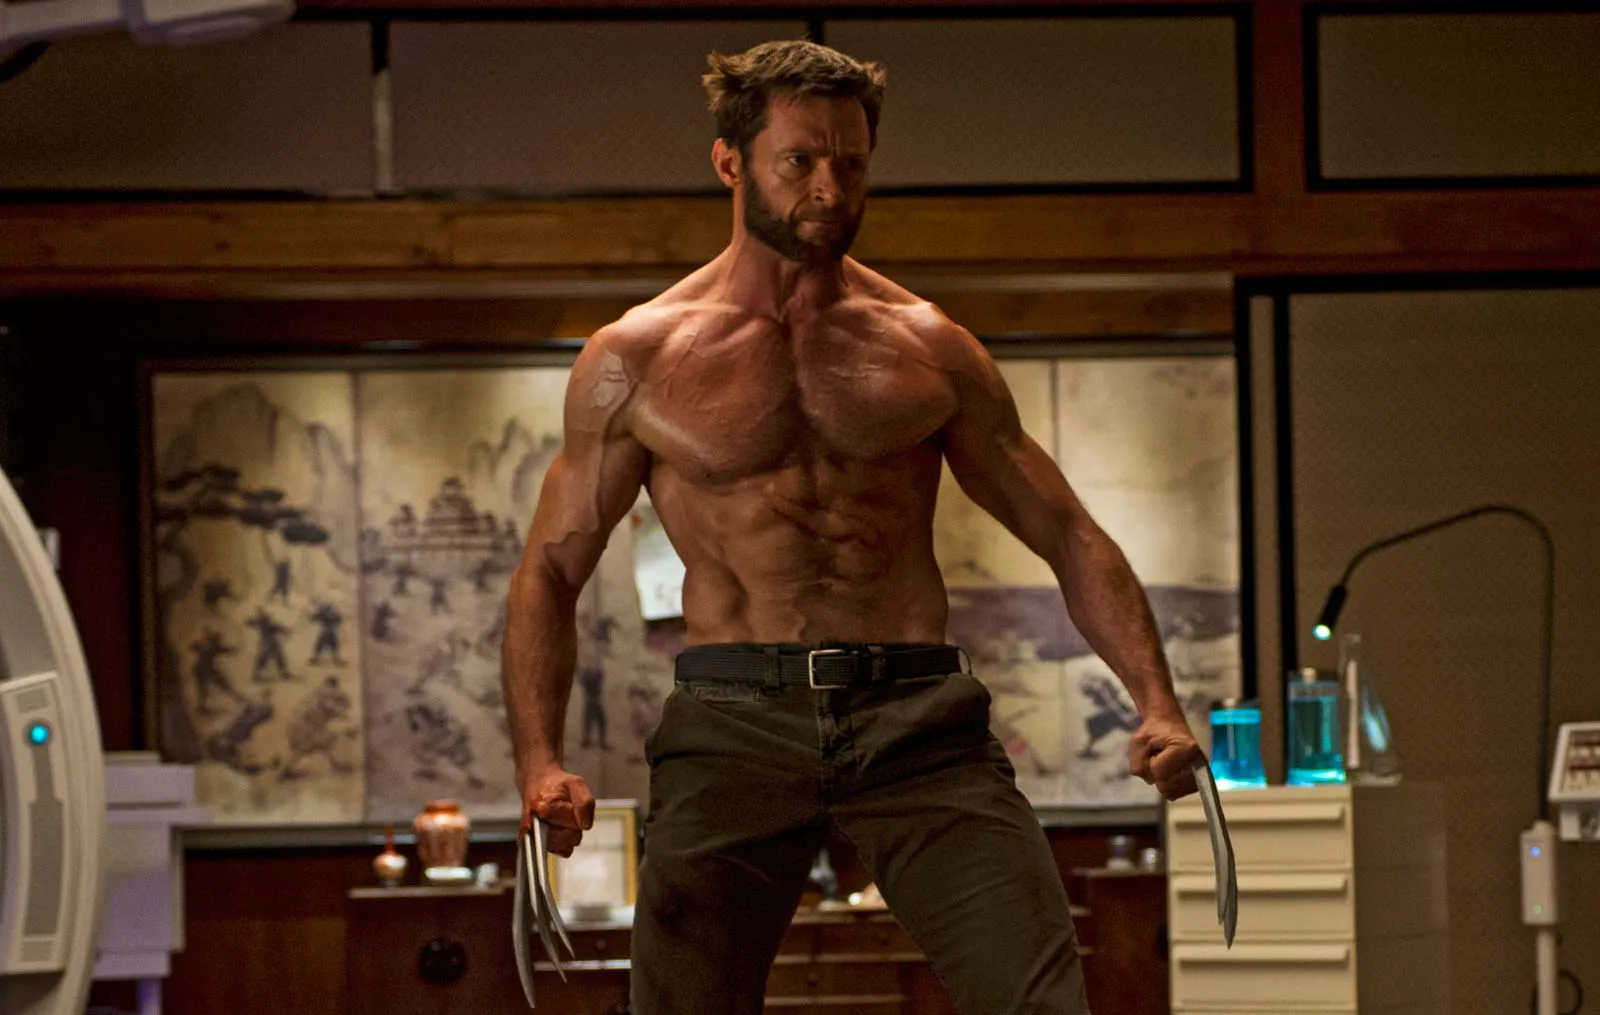 What is the name of the actor who portrayed Wolverine in the X-Men movies?